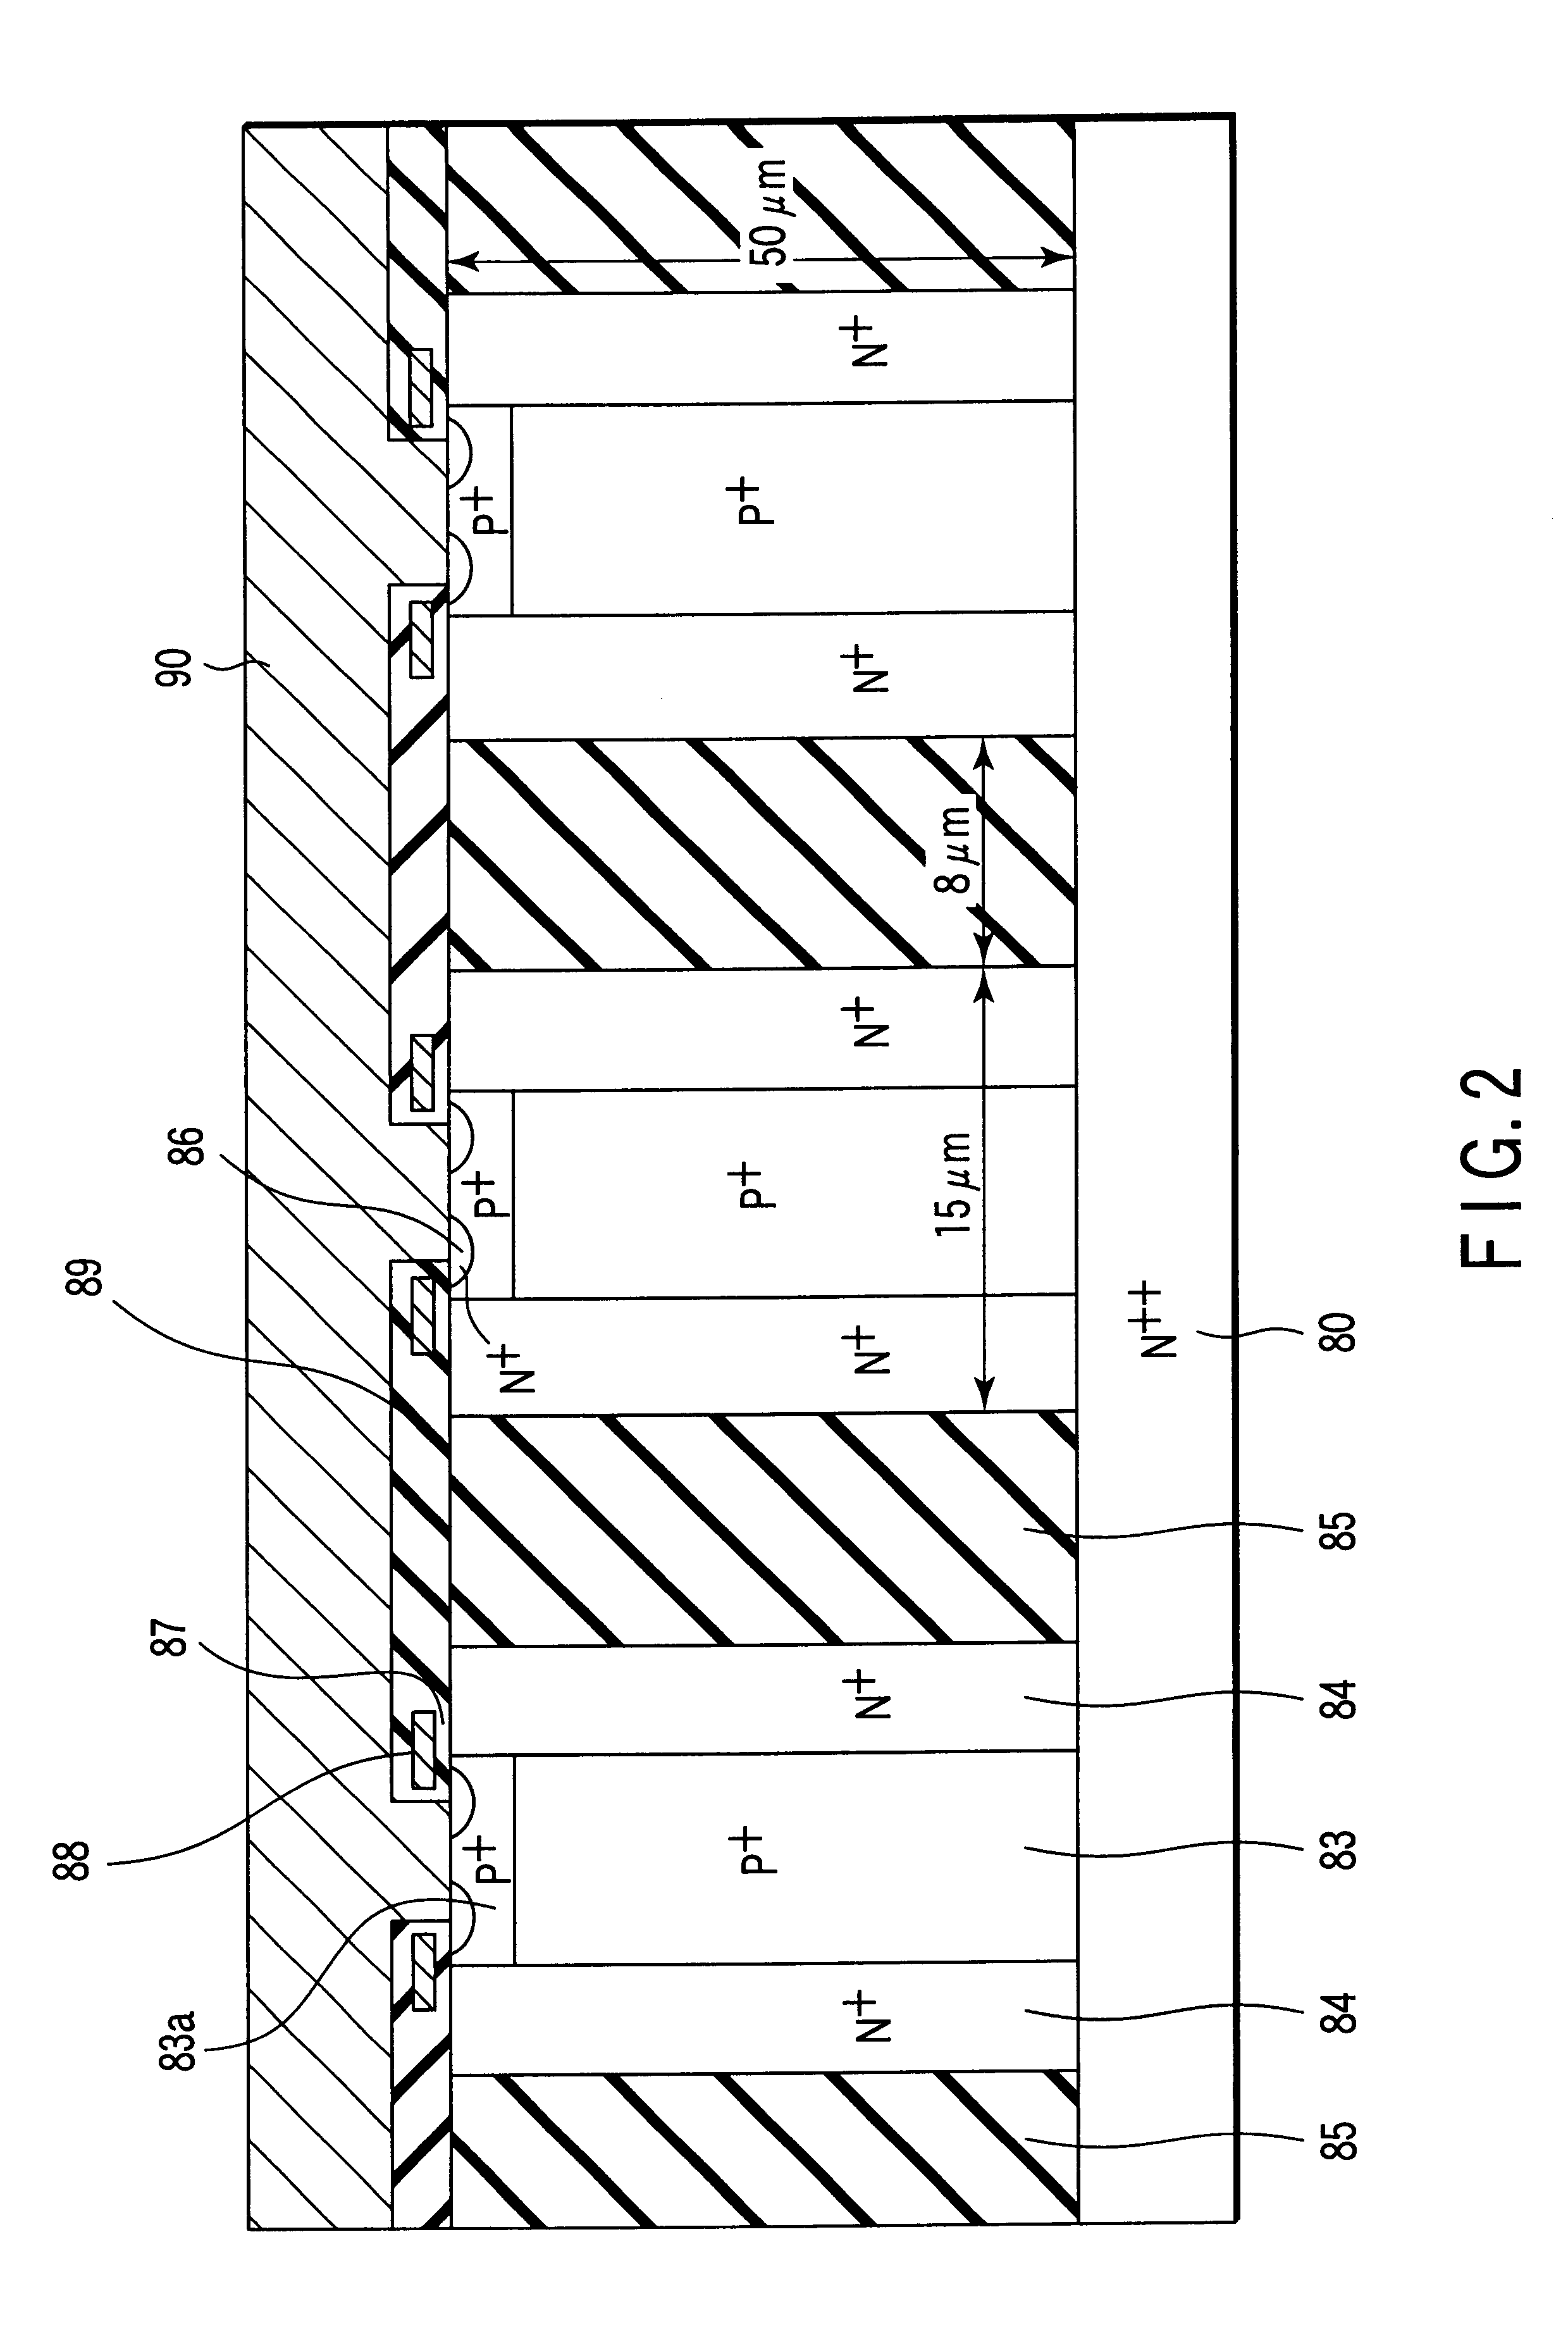 Power MOSFET having laterally three-layered structure formed among element isolation regions